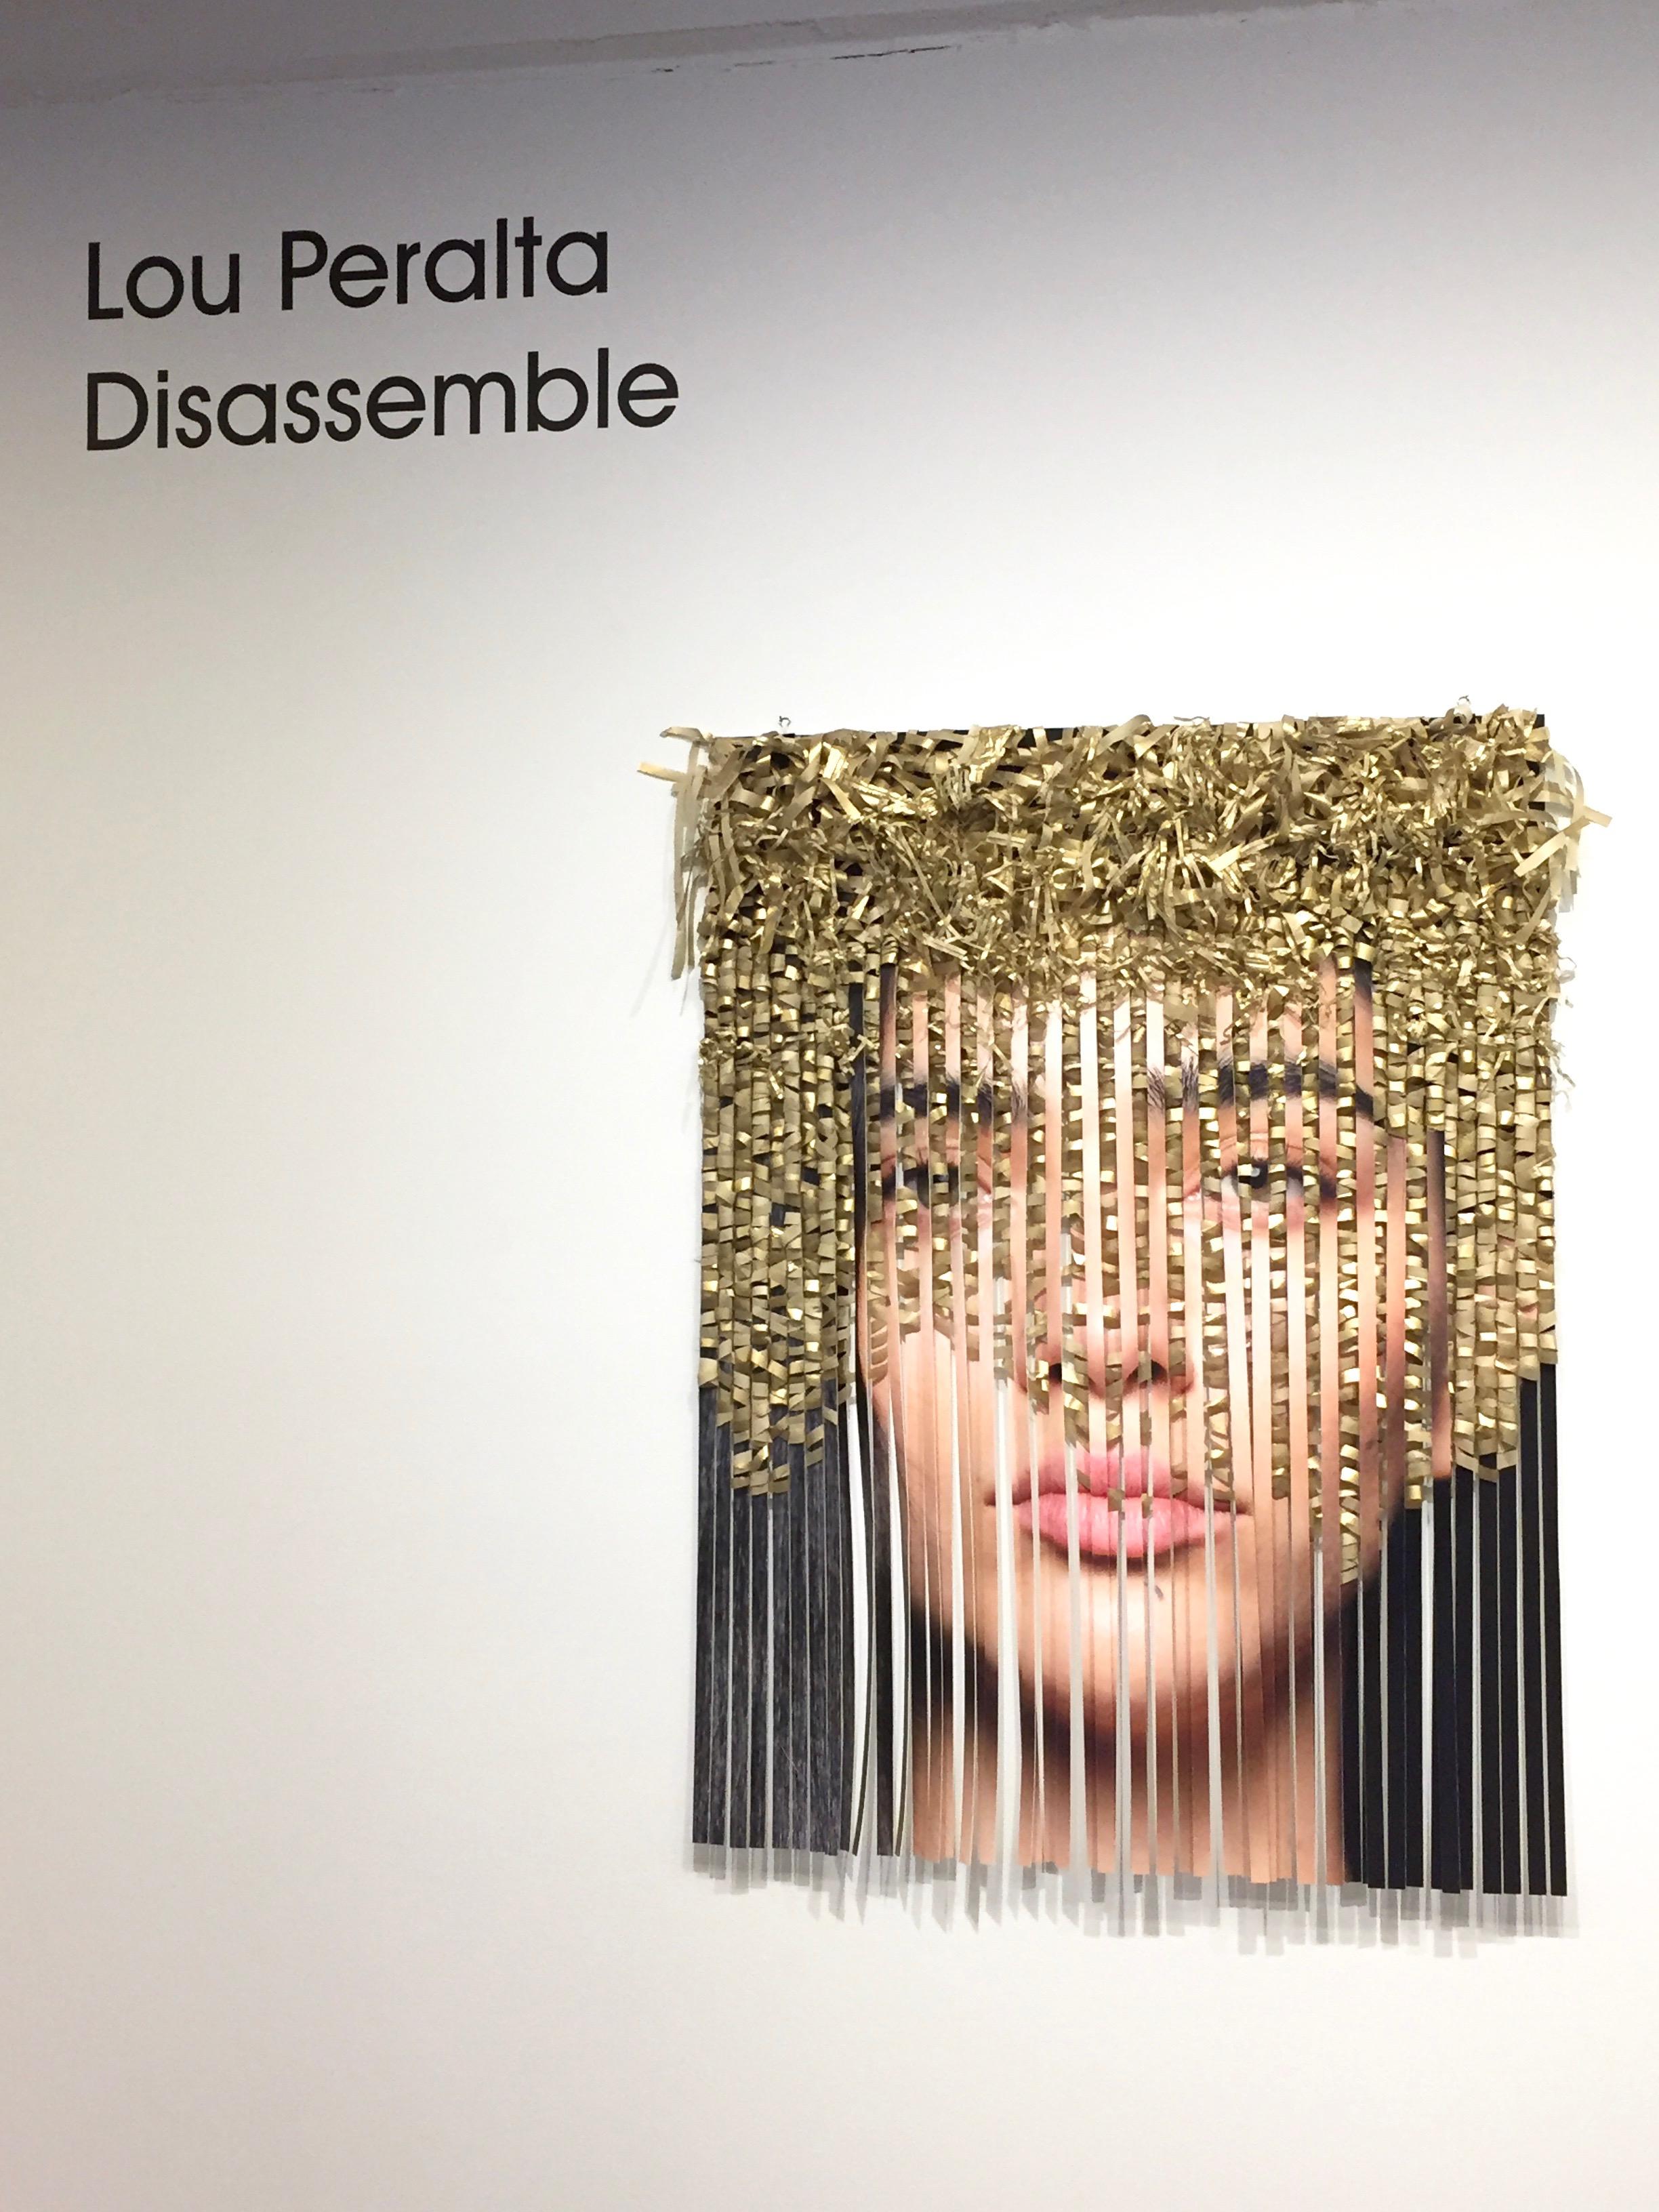 Disassemble #23 - Archival pigment print portrait hand-woven with gold ribbons - Photograph by Lou Peralta